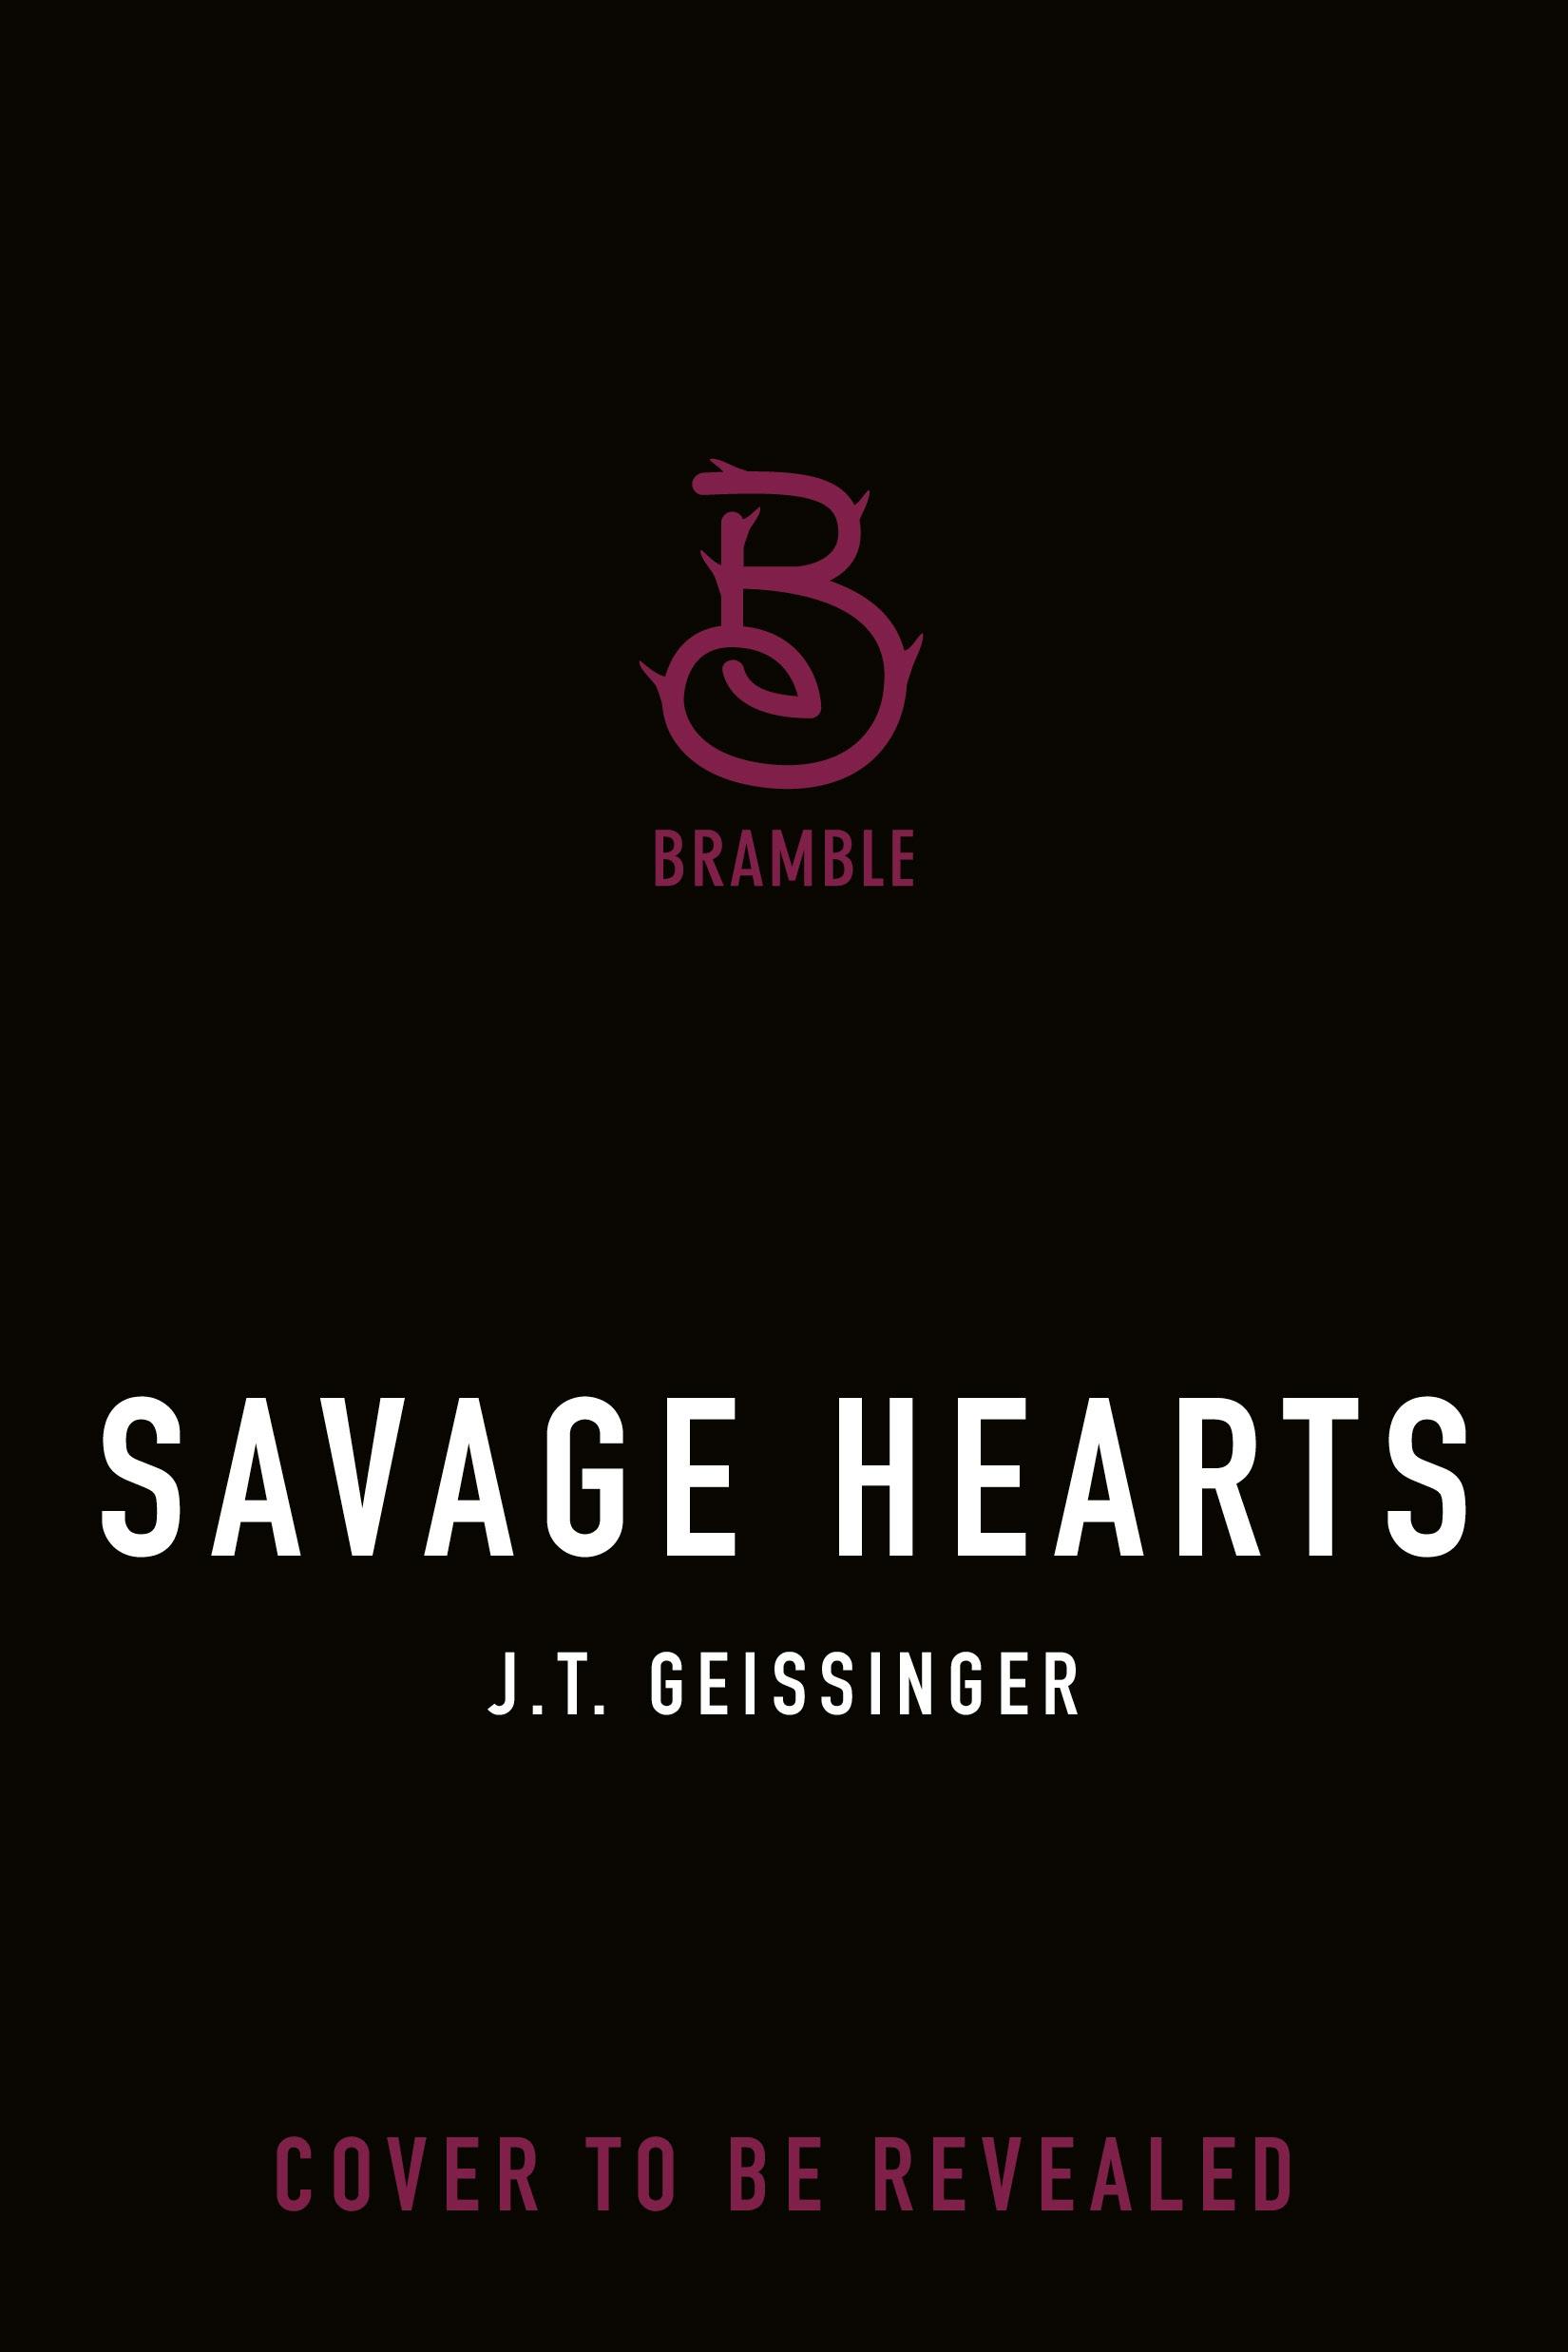 Cover for the book titled as: Savage Hearts